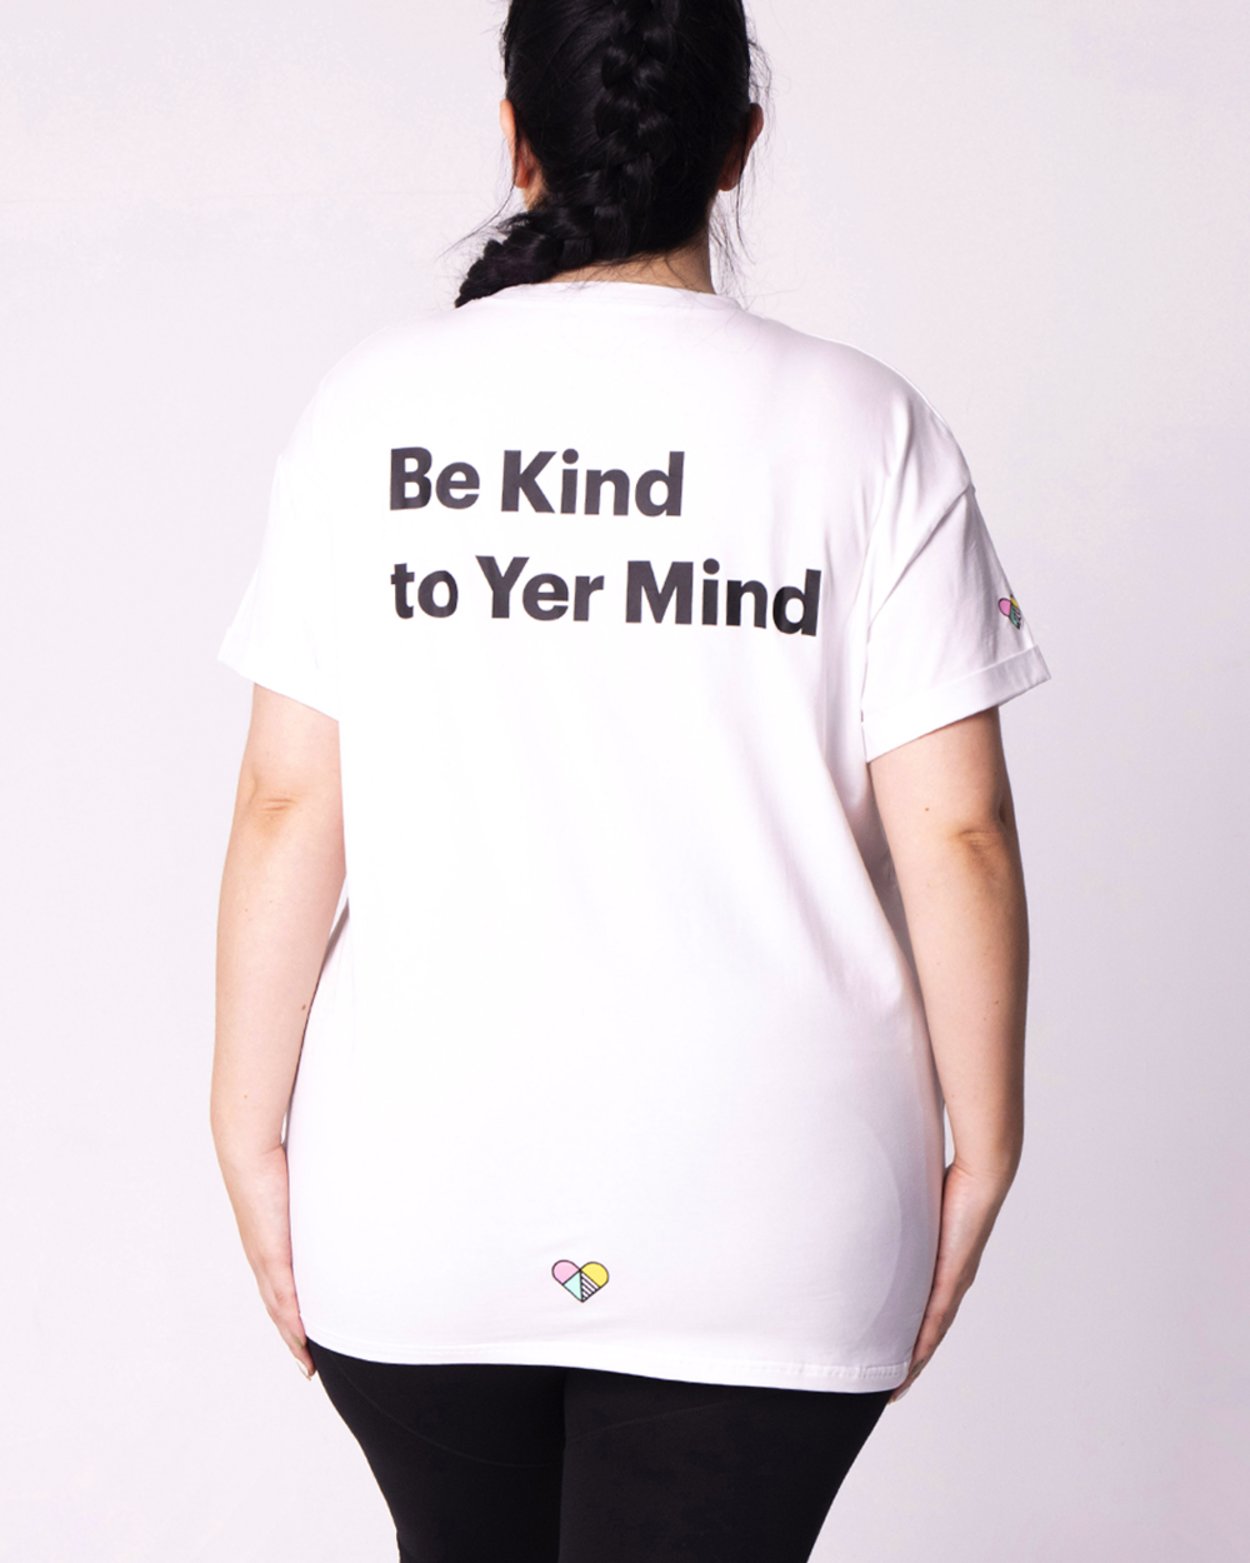 Be Kind to Yer Mind T-Shirt